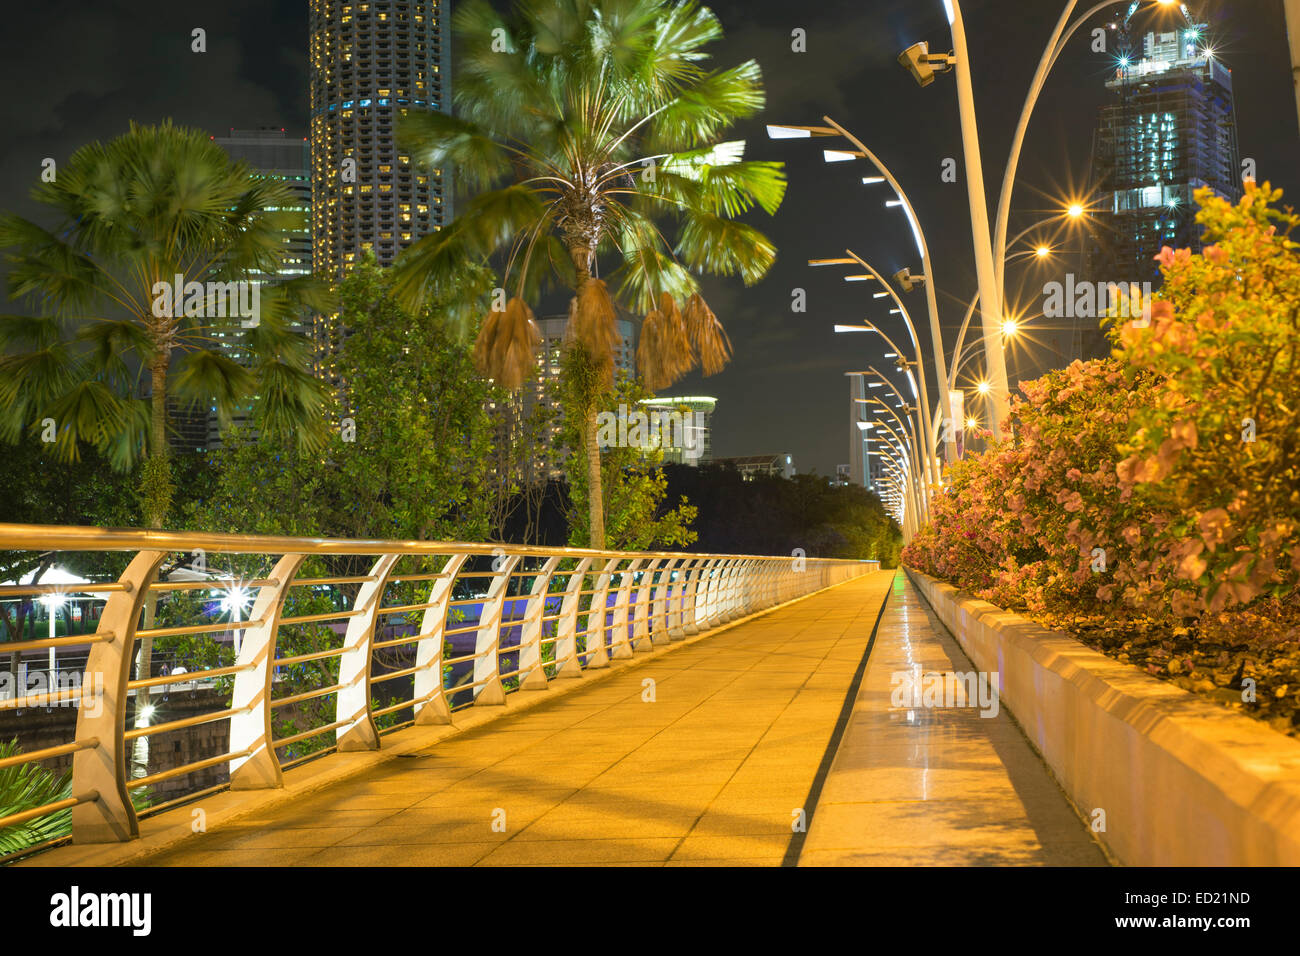 scenic illumination of pedestrian walkway in Singapore downtown by night Stock Photo